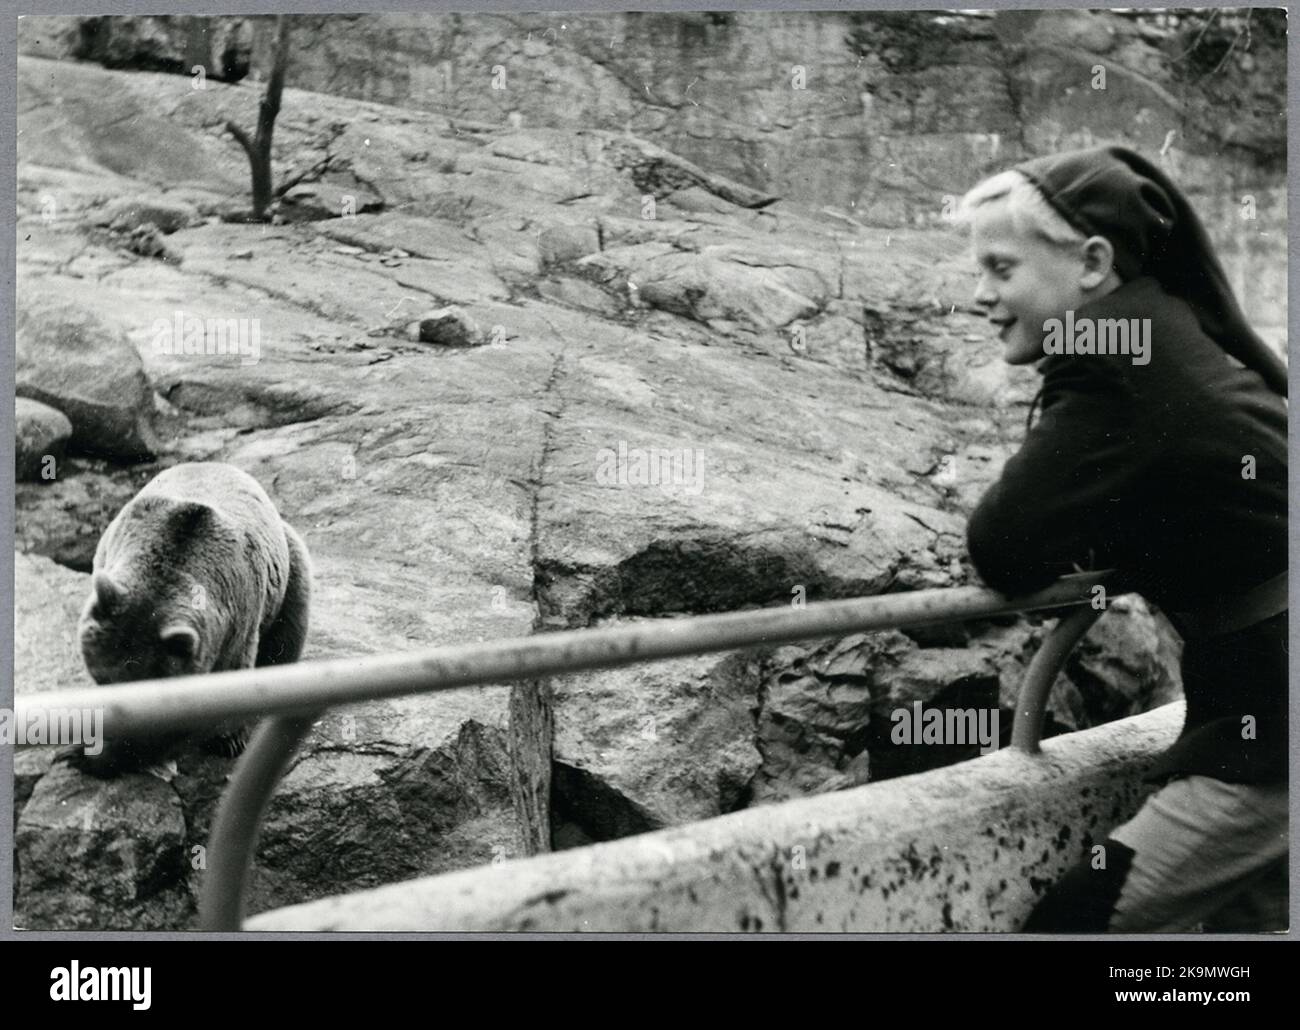 Alf Larsson as Nils Holgersson at a zoo. Stock Photo